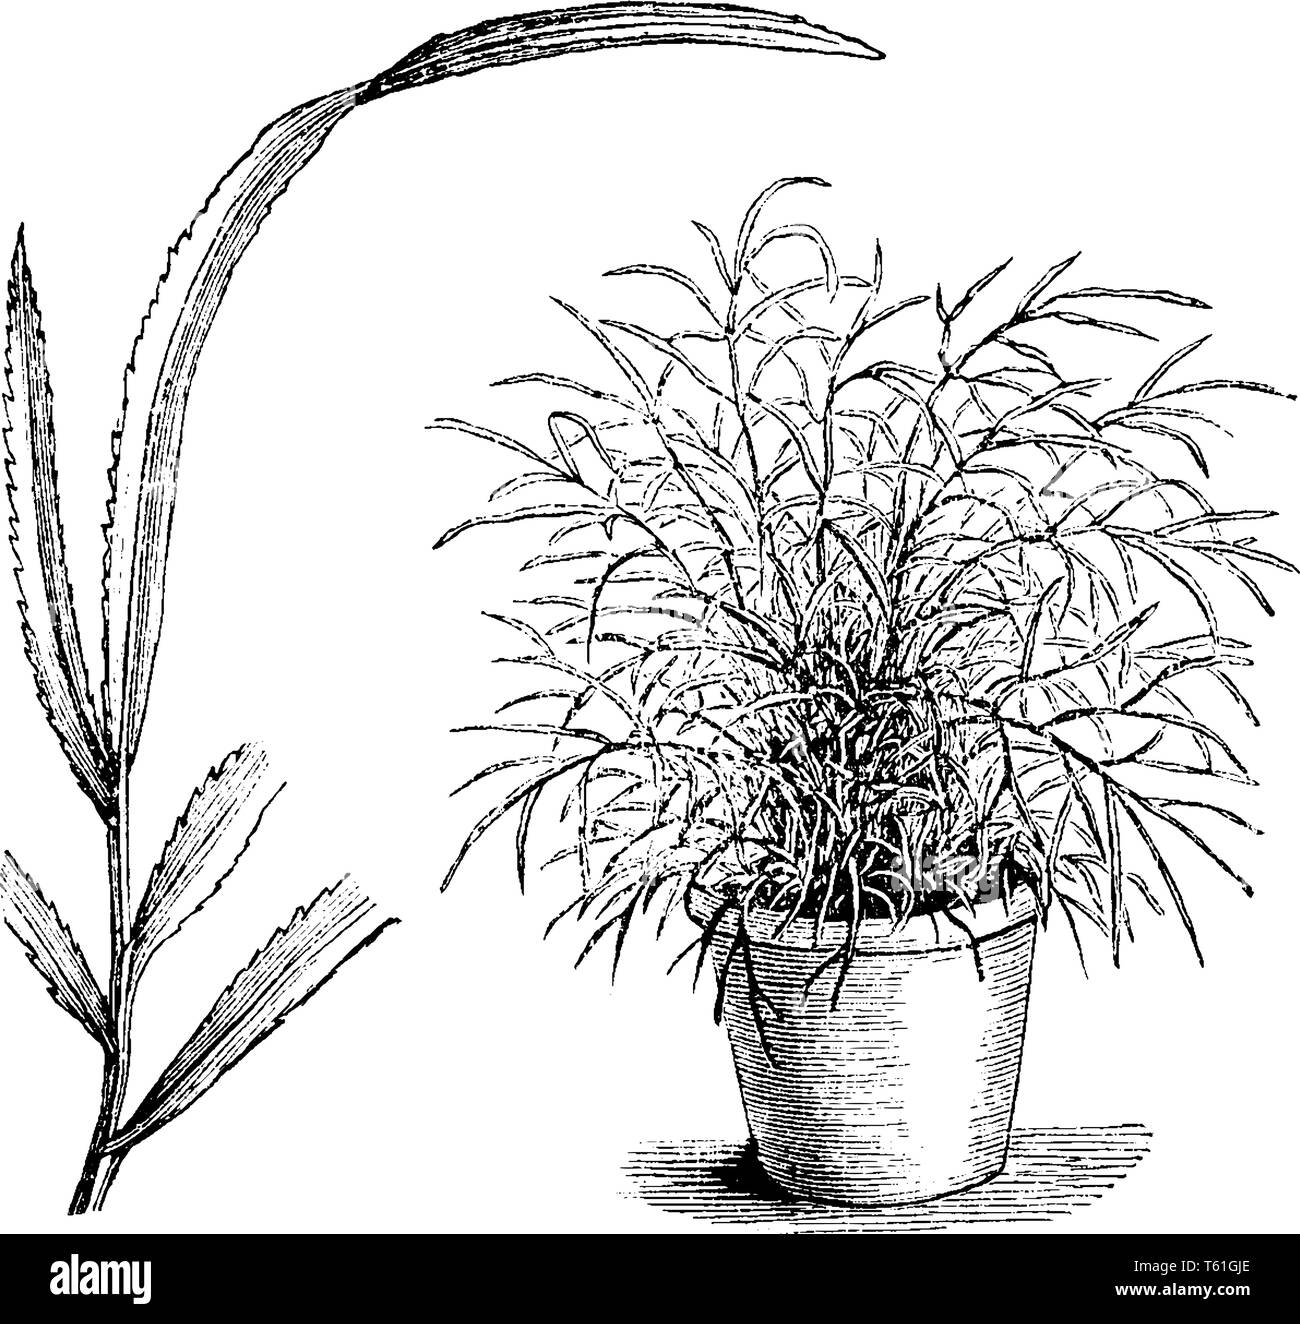 The Pteris Serrulata Tenuifolia plant leaves are slender and liner. Stem leaves have grown in dense. It species found in china, vintage line drawing o Stock Vector